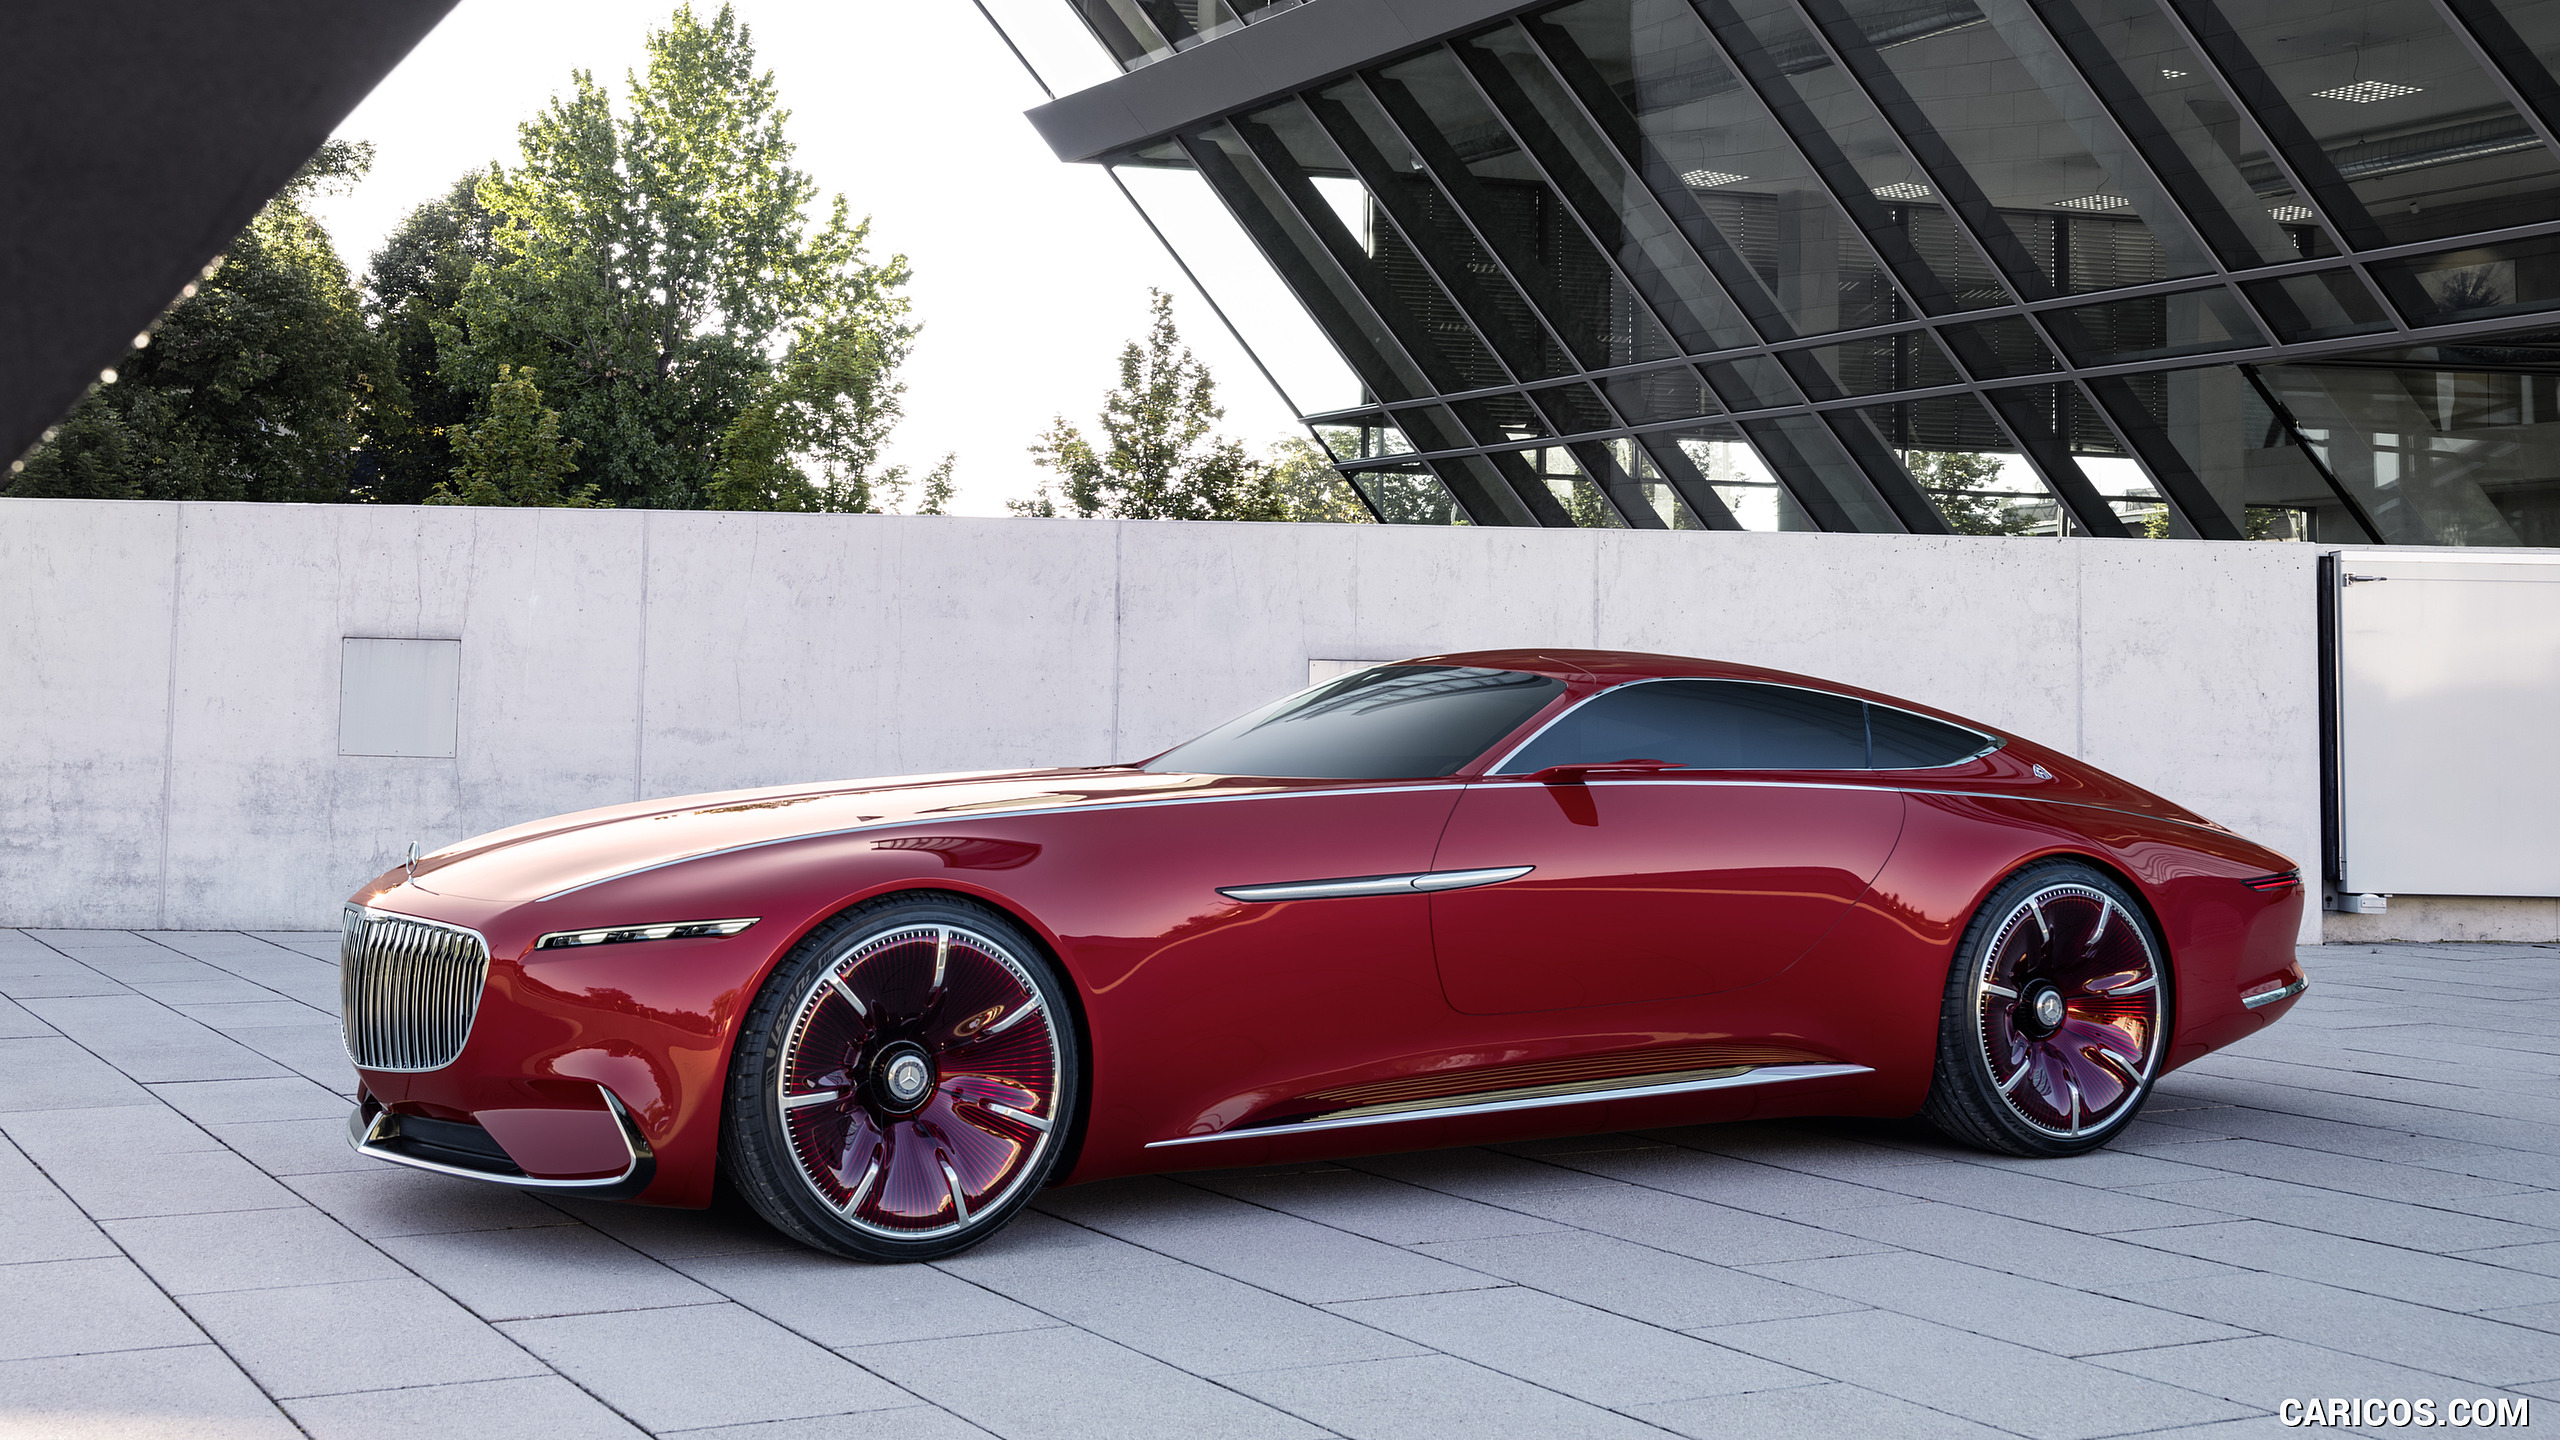 2016 Mercedes-Maybach 6 Concept - Side, #26 of 31